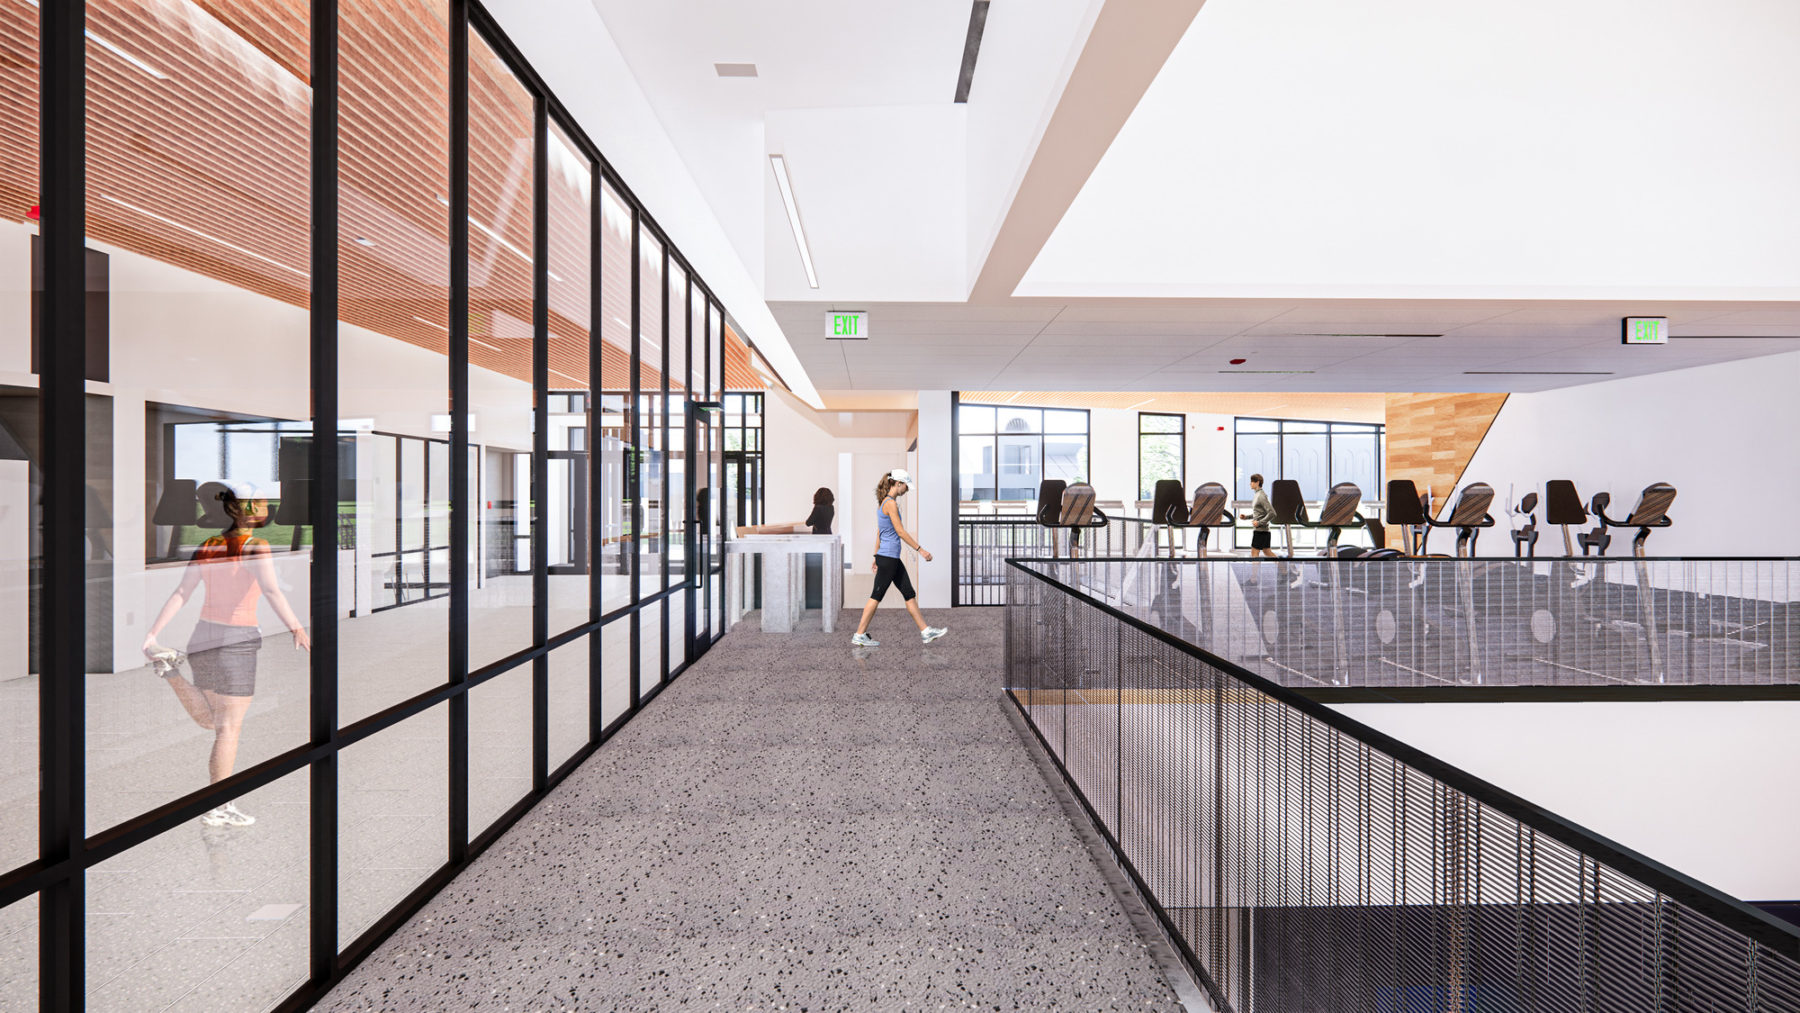 Interior rendering of fitness. Glass runs along left side of image and balcony overlooking gym below.